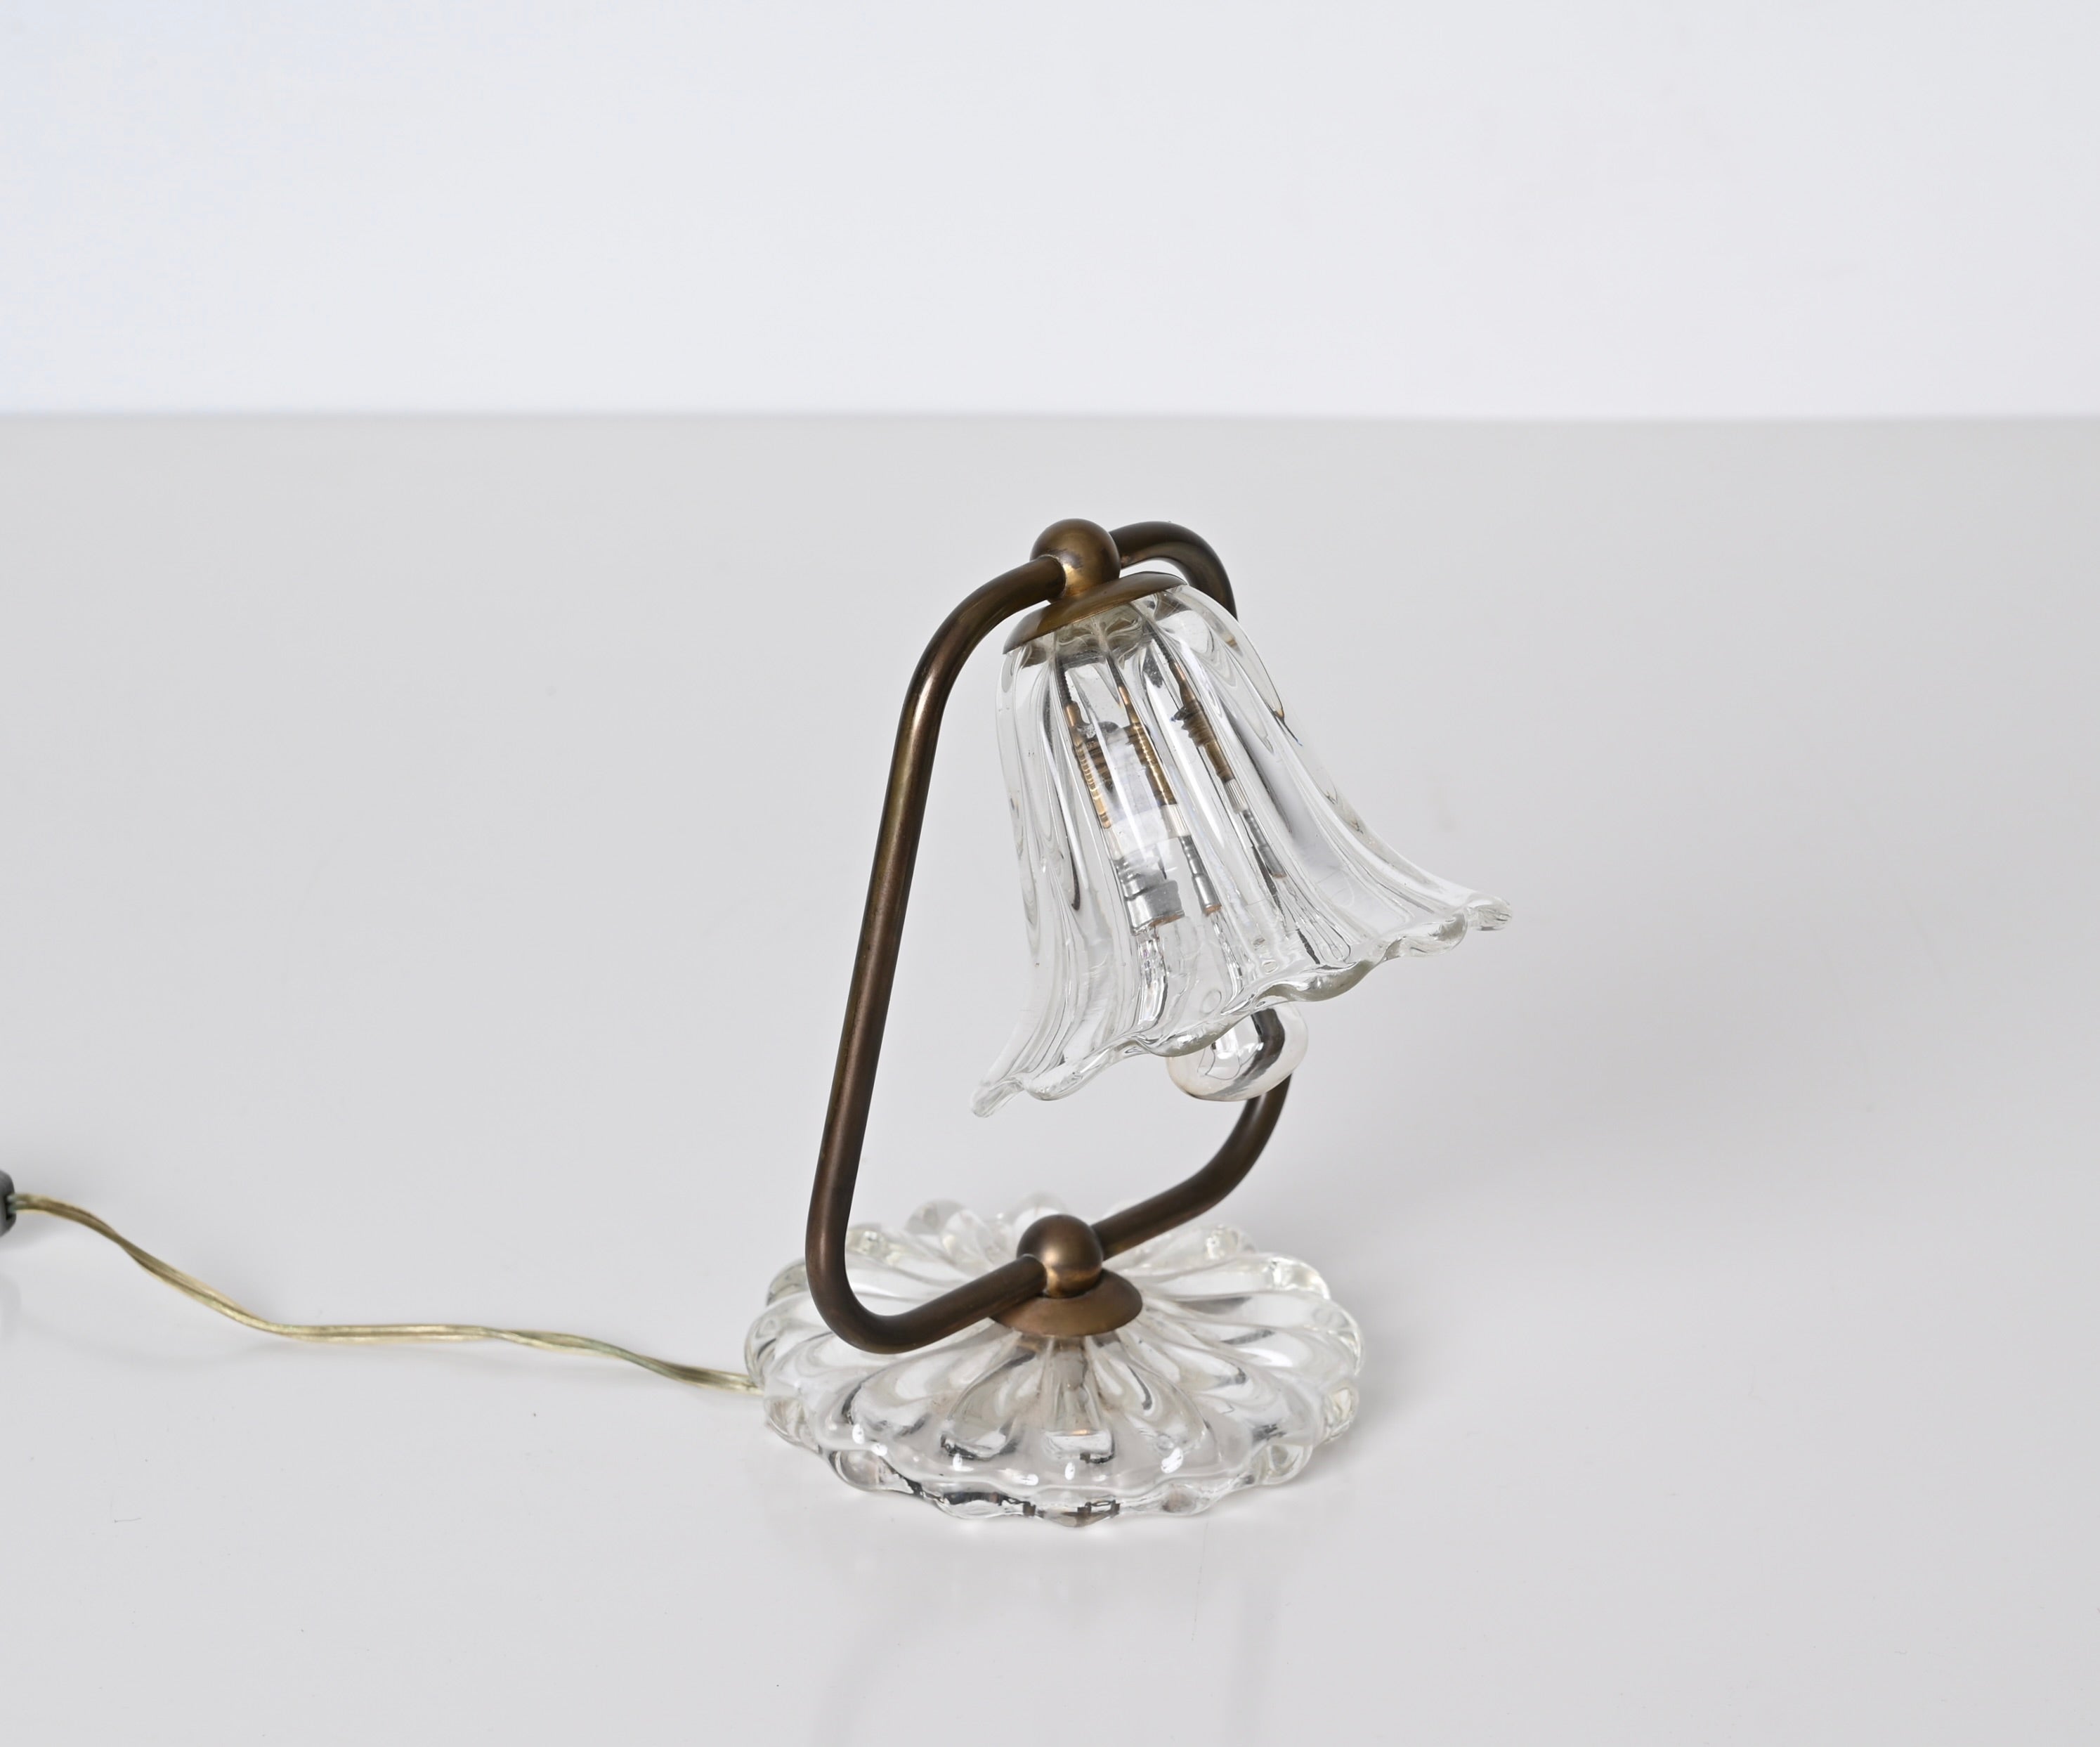 Gorgeous bell shaped table lamp in Murano glass and brass. This romantic table lamp was made in the early 40s in Italy and is attributed to Carlo Scarpa.

This finely crafted lamp recalls the the shape of a bell in motion. The base and the